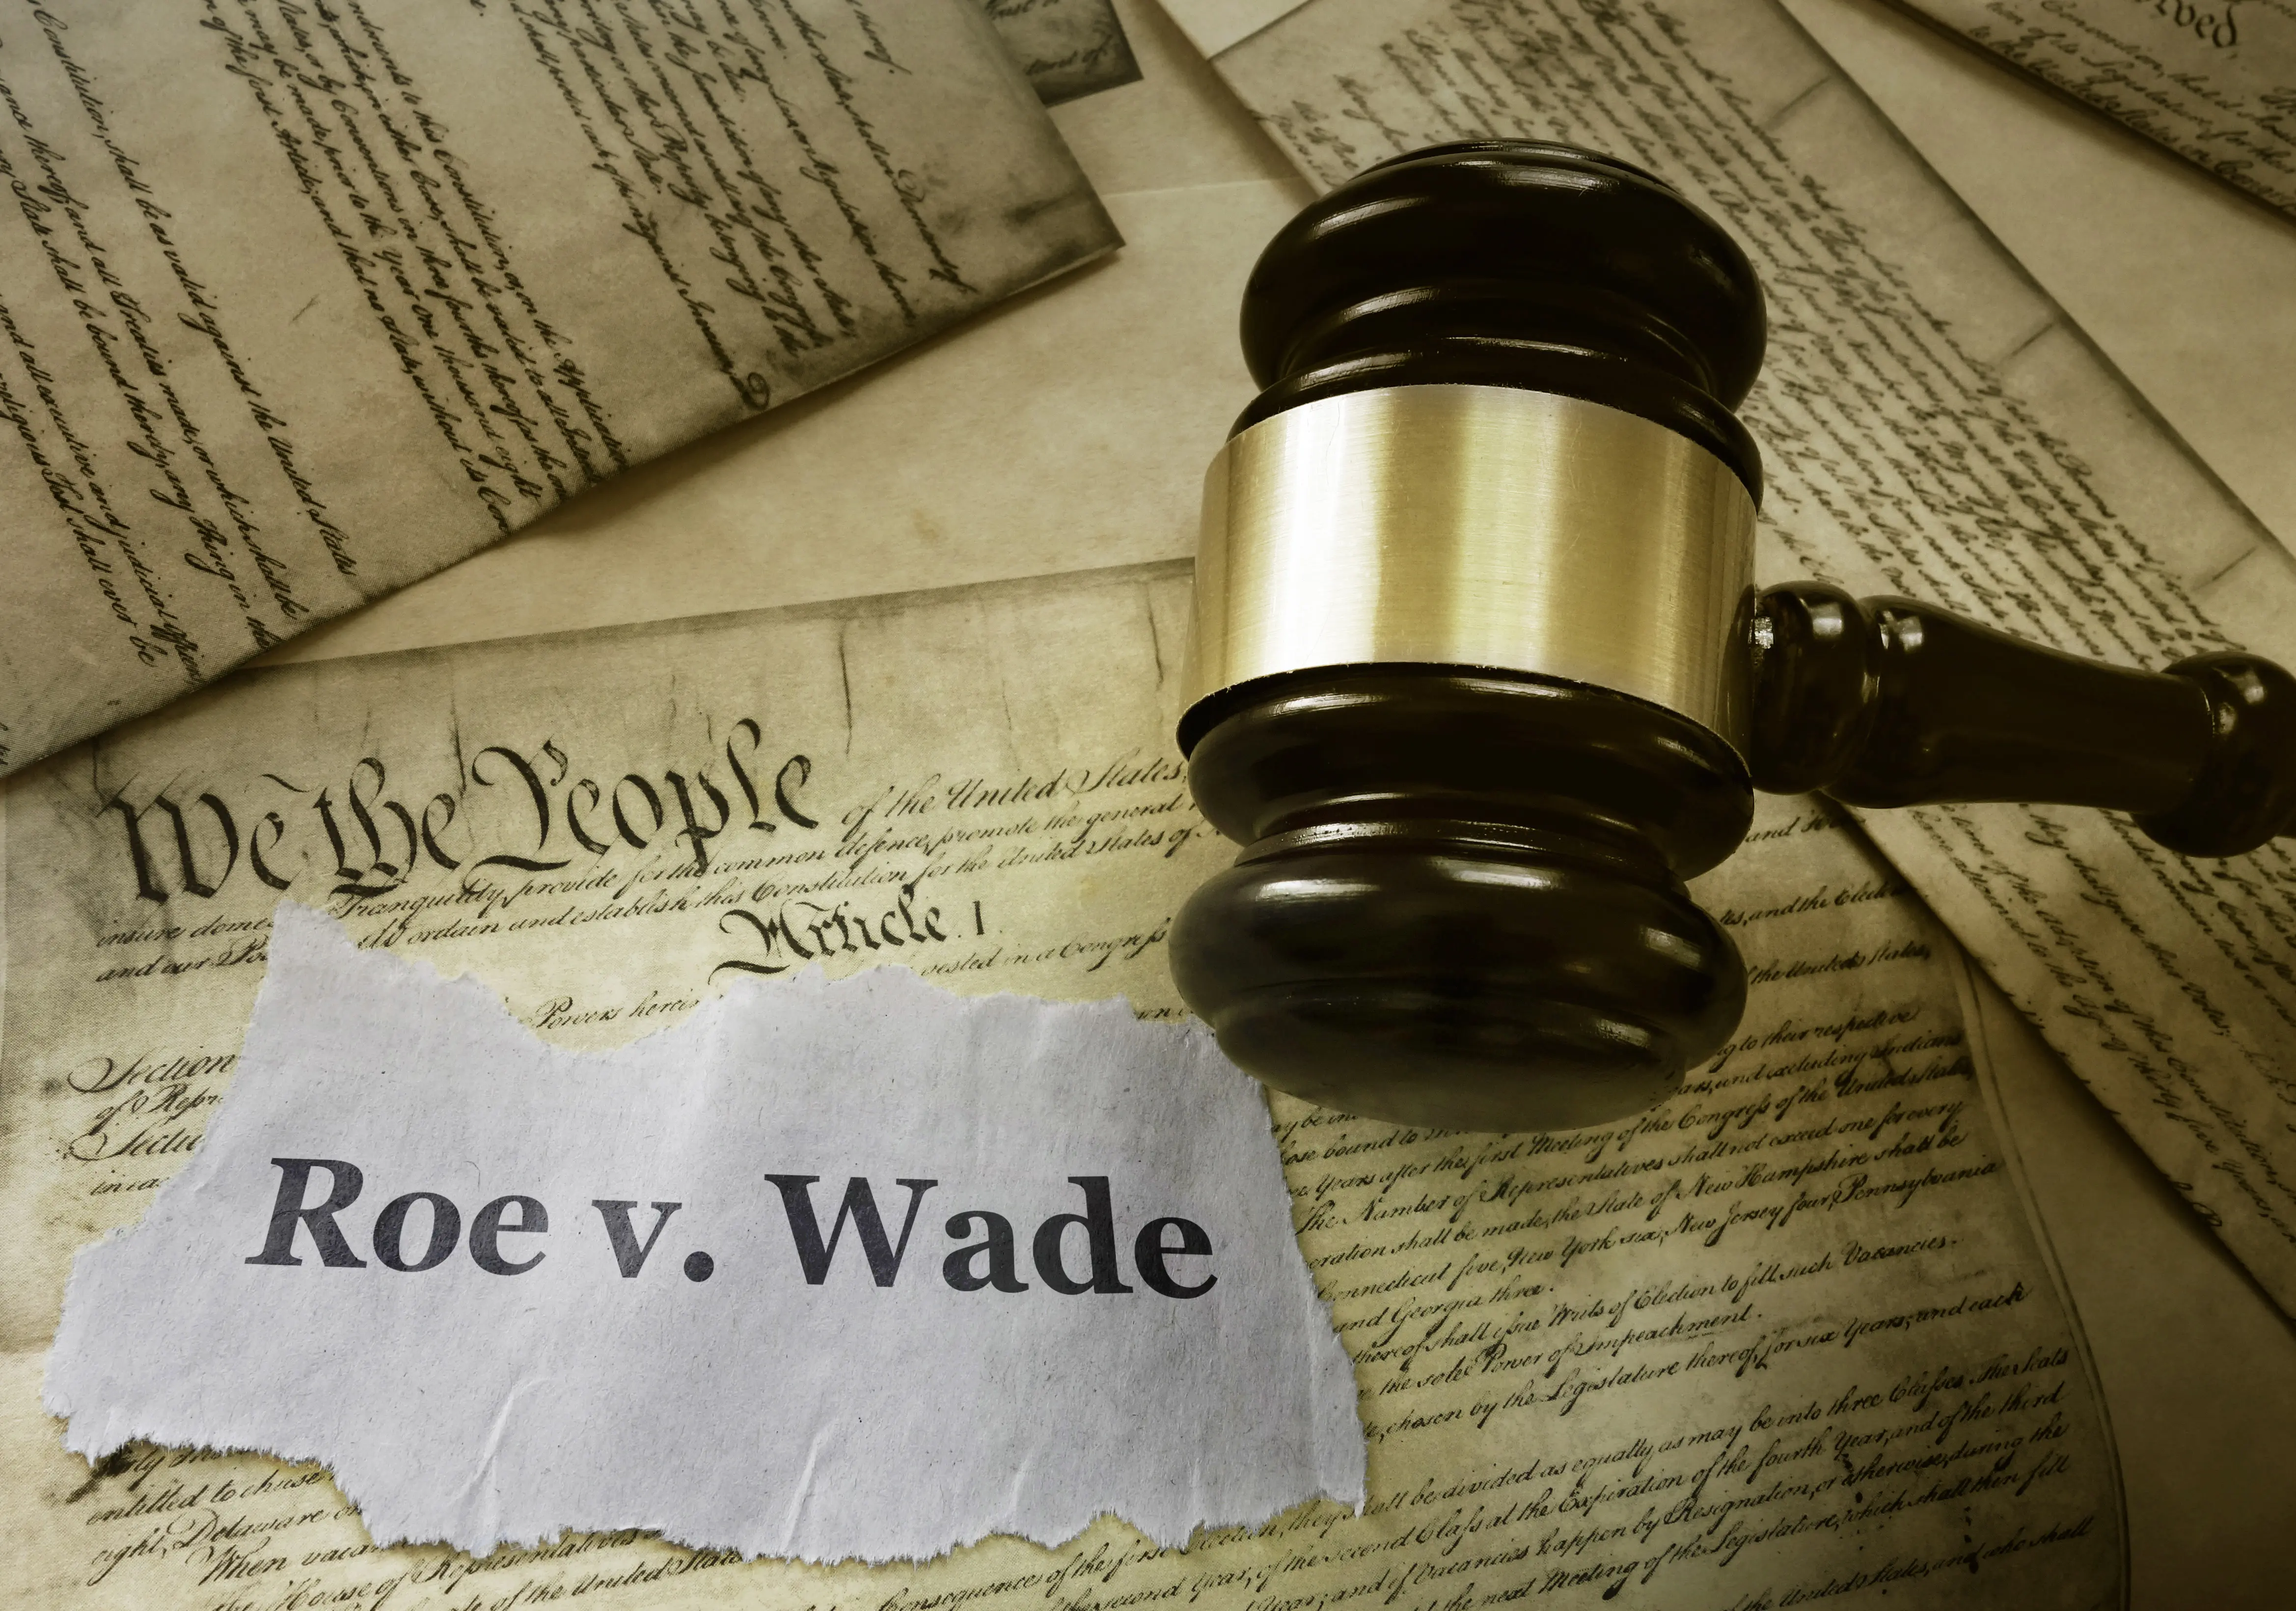 Roe v Wade news headline with gavel on a copy of the United States Constitution legalization of abortion